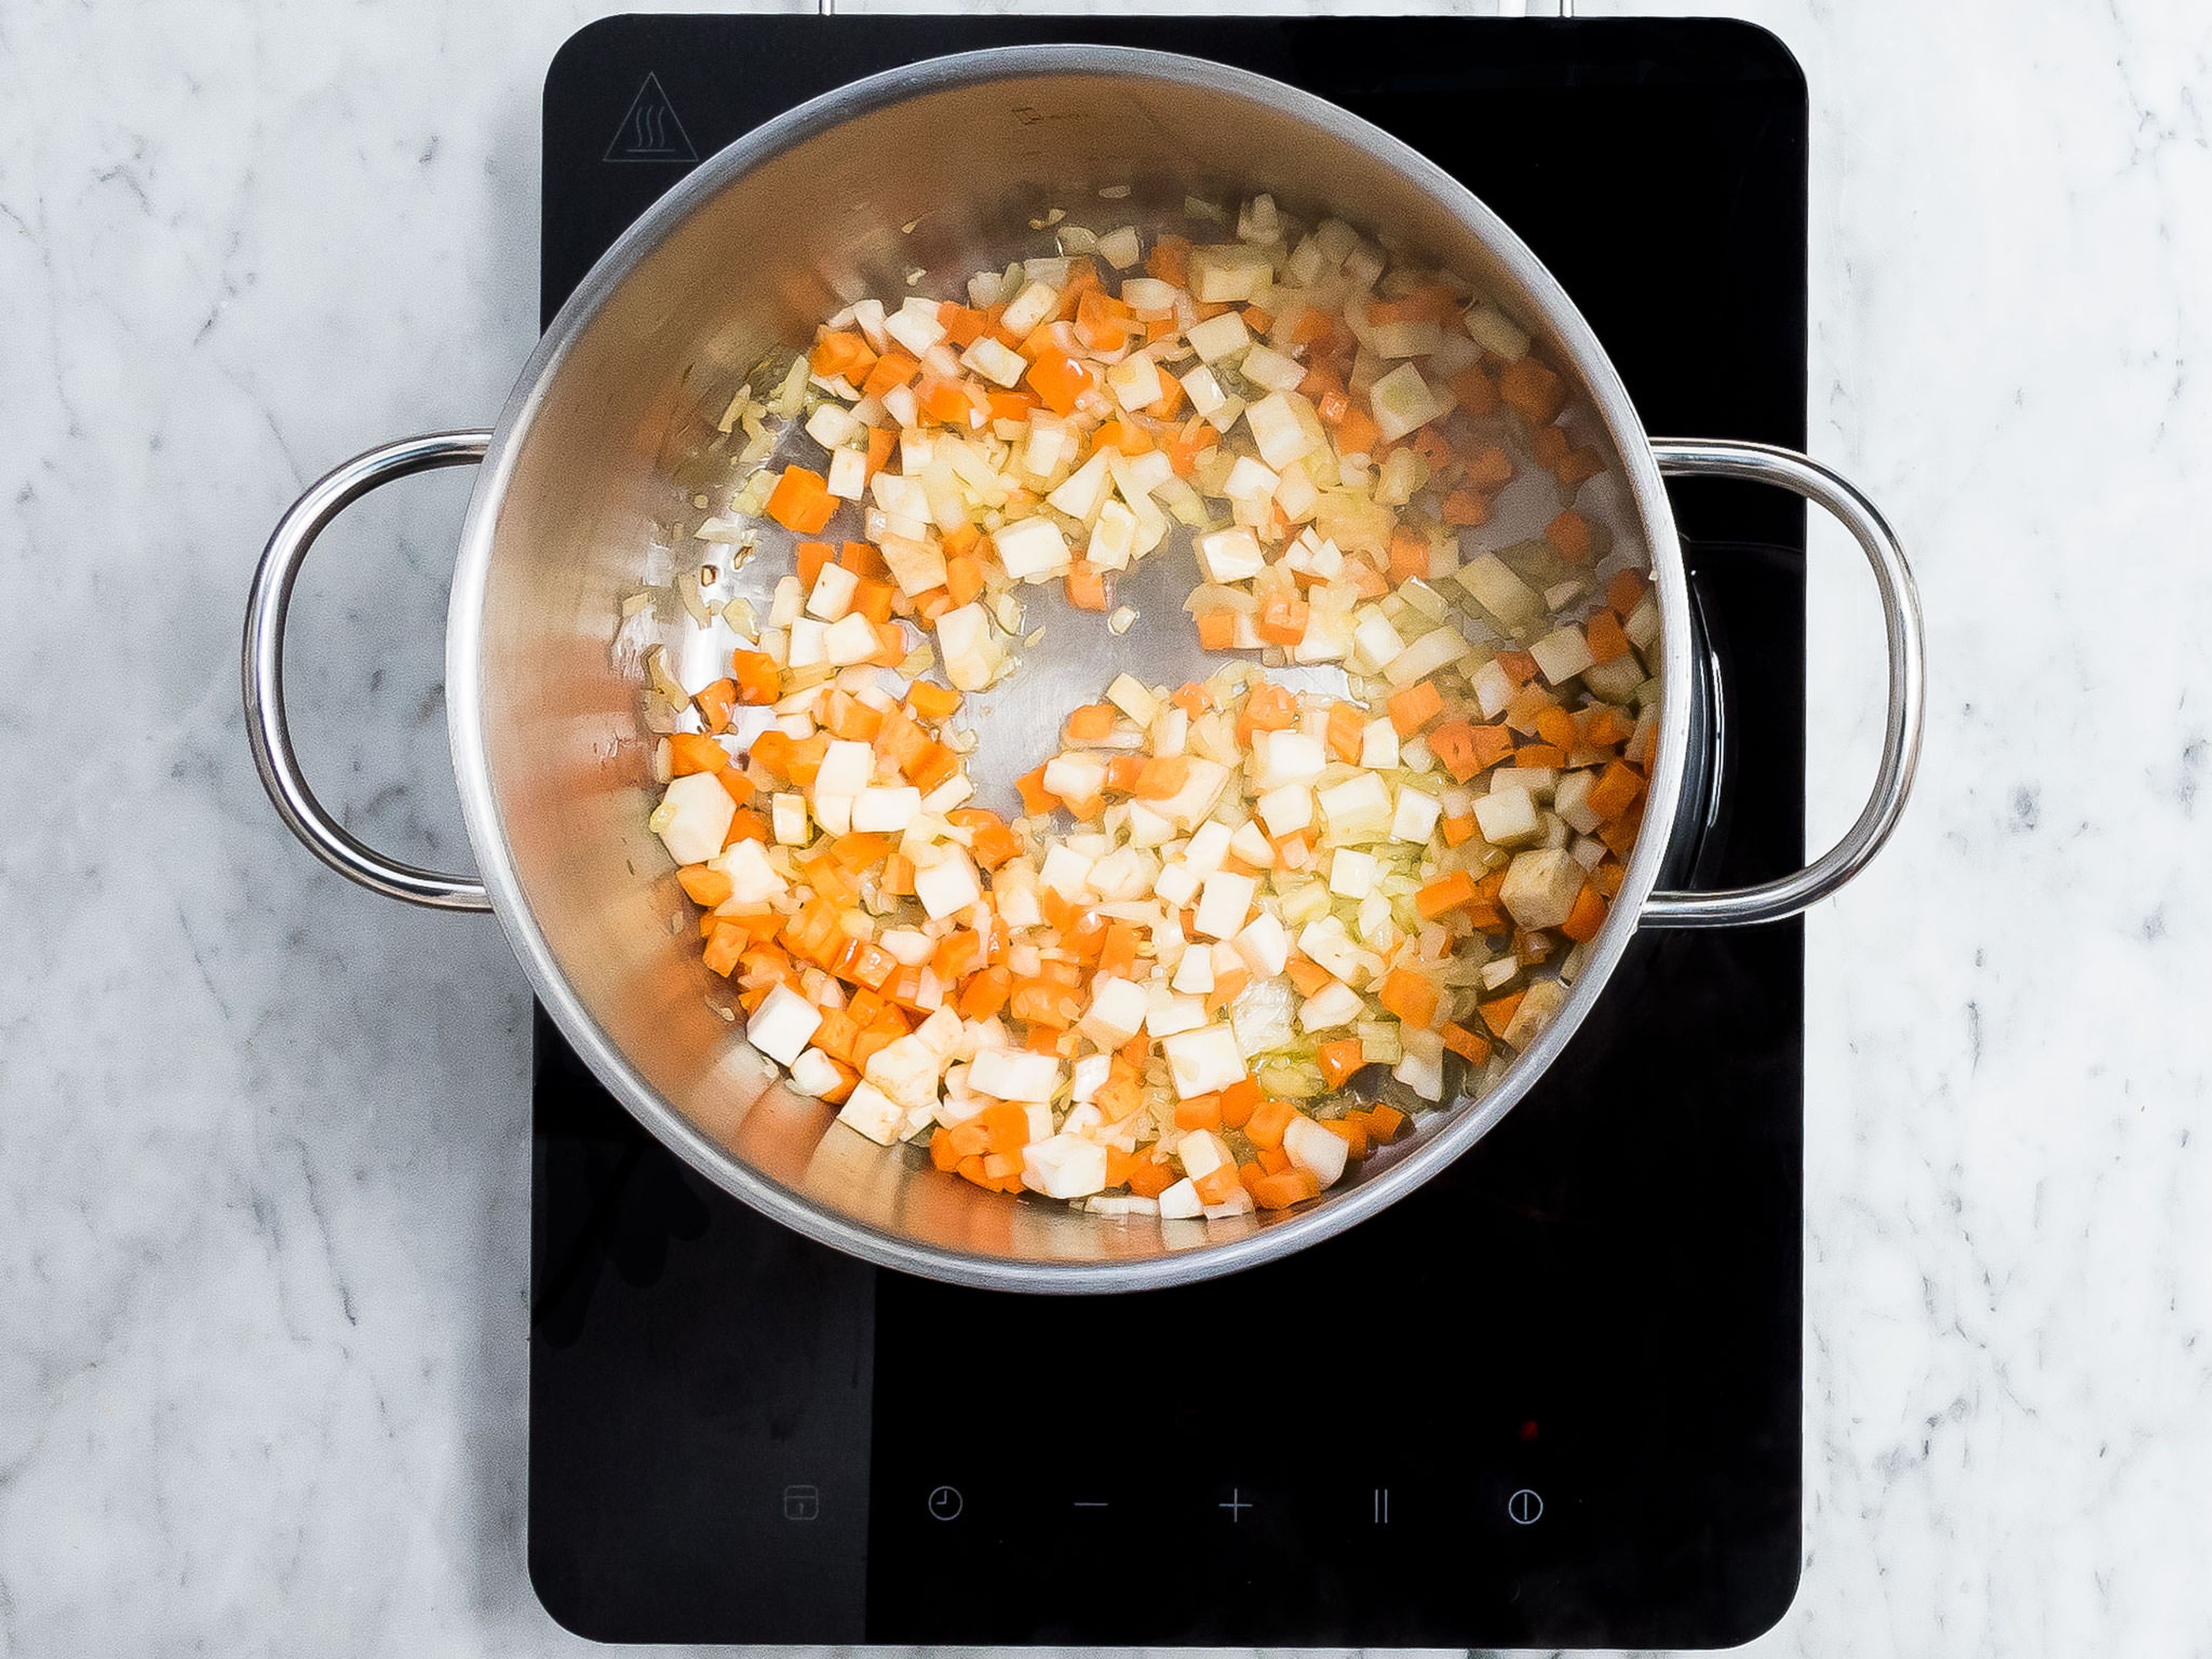 Peel and dice onion, carrot, parsley root, and celery root. Peel and finely crush garlic. In a large pot, heat olive oil over medium to high heat and add diced onion, carrot, parsley root, and celery. Sauté until golden brown, then add crushed garlic and sauté for 1 - 2 min. more.